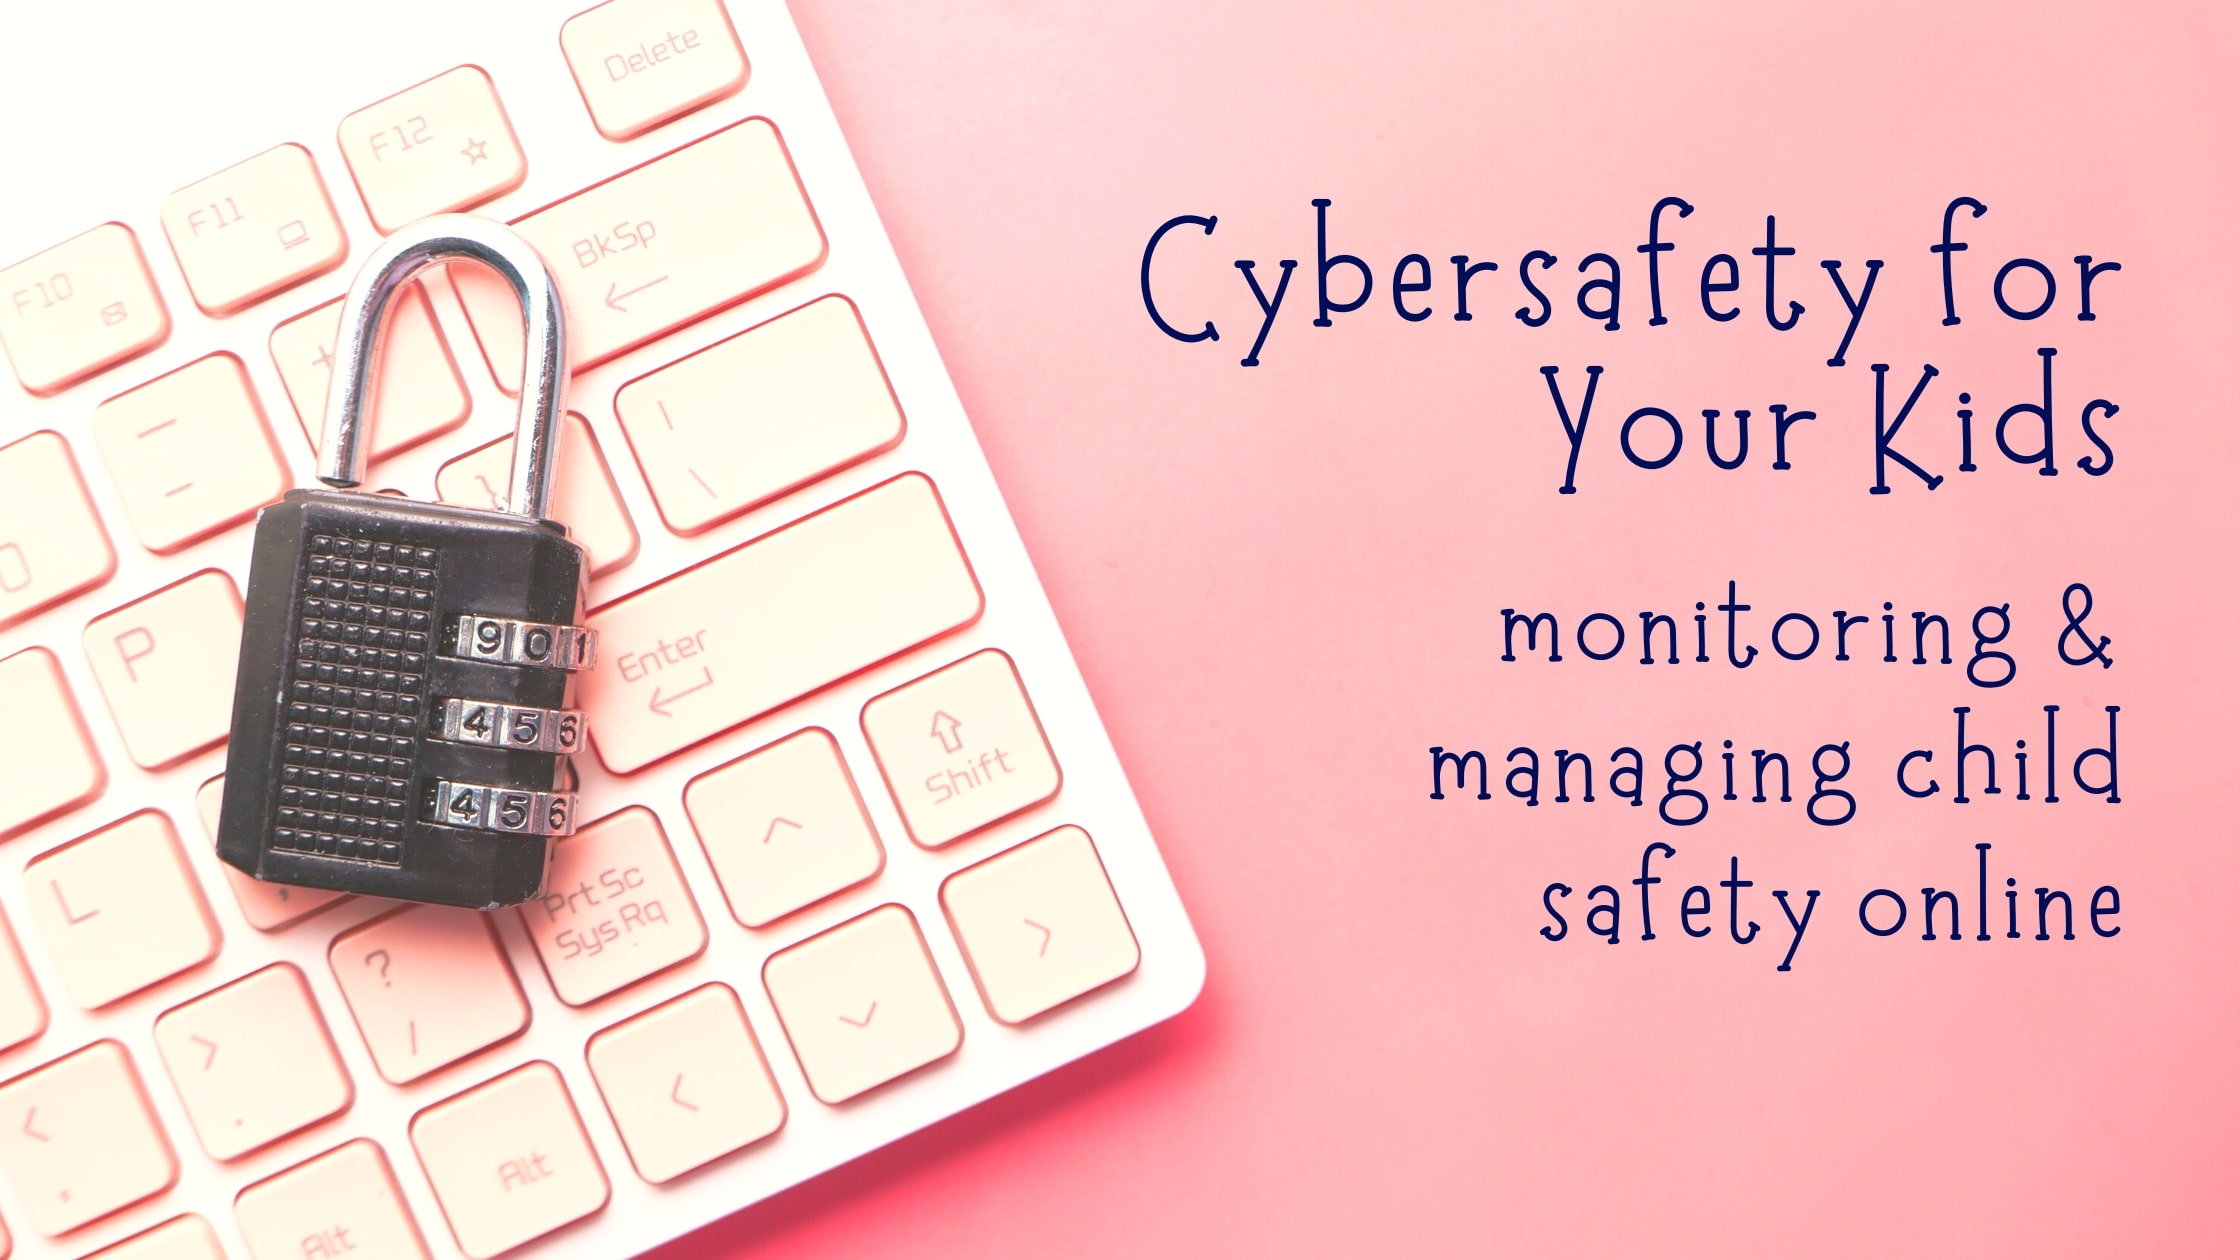 cybersafety for your kid, cybersafety, cyber safety, cyber security, online safety for kids, keep kids safe online,